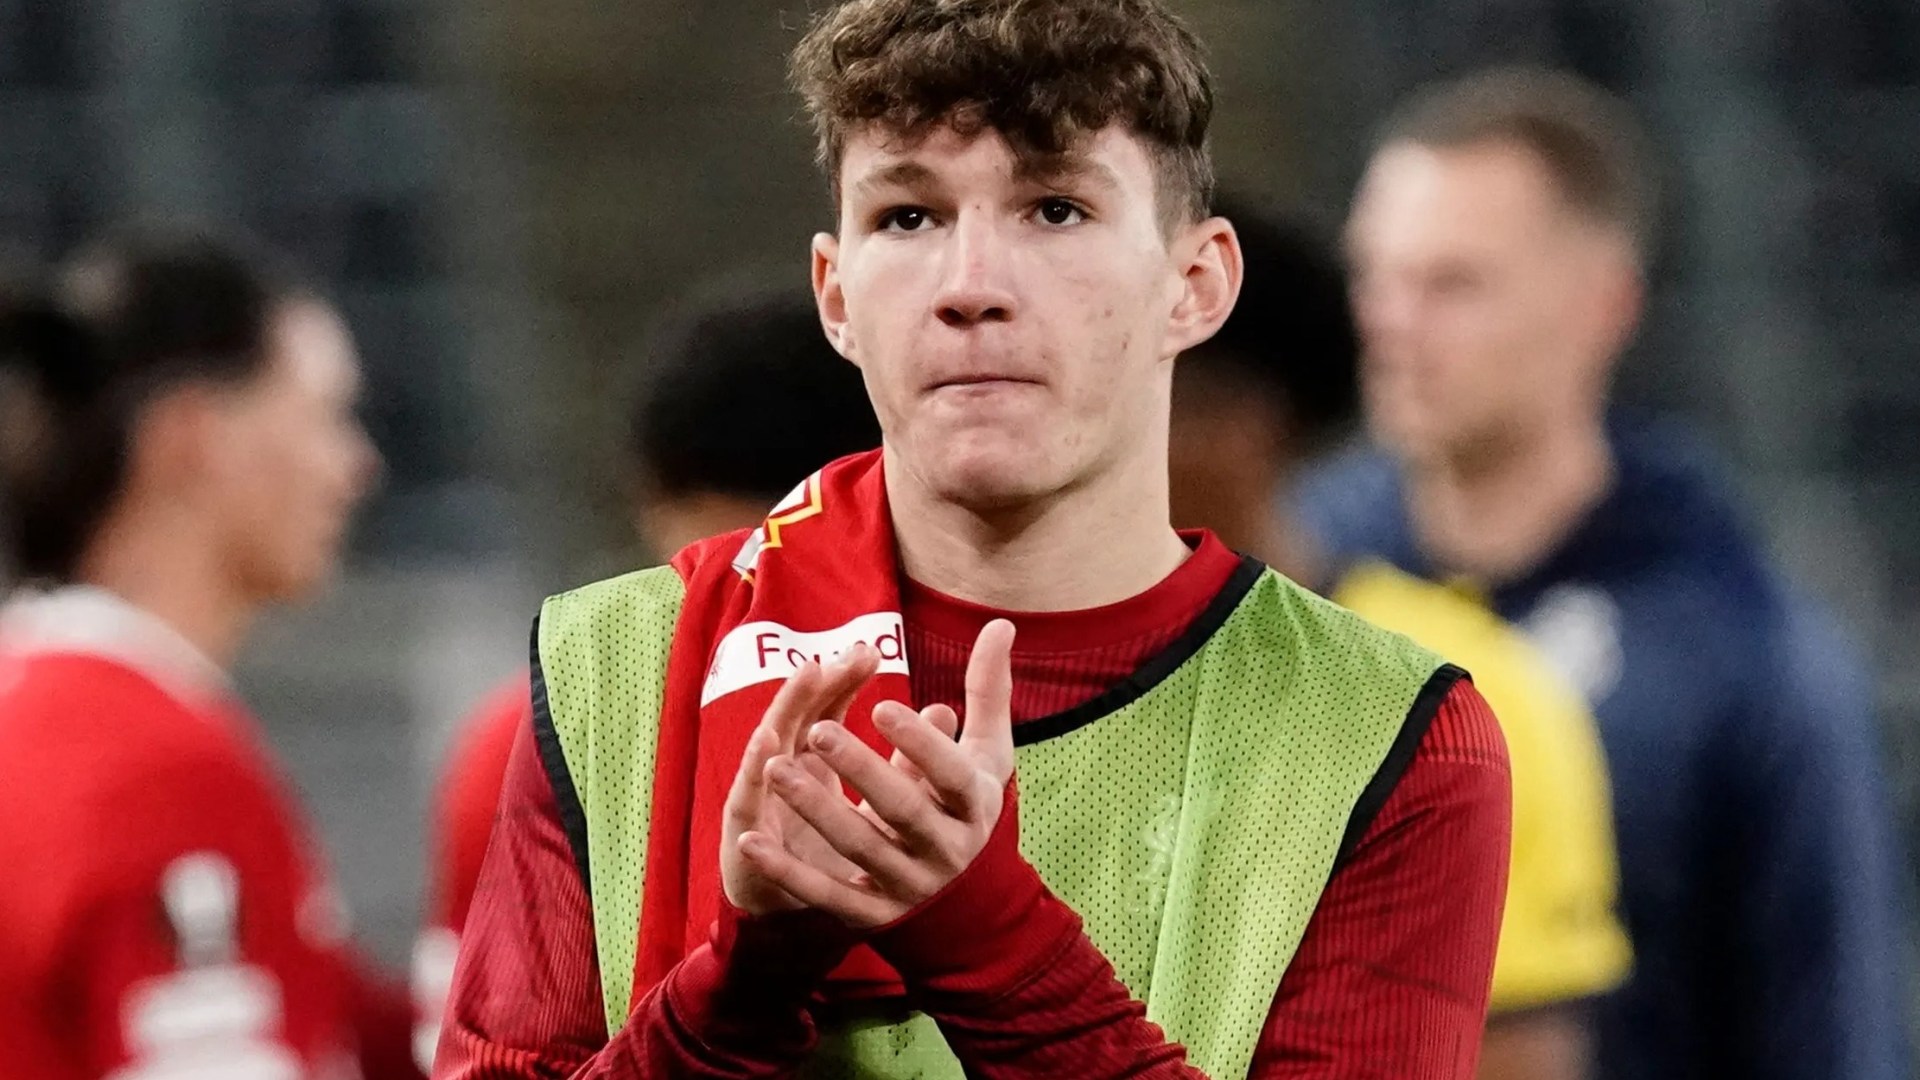 Premier League cult hero's son now making own way in game for Liverpool just eight years after dad's retirement